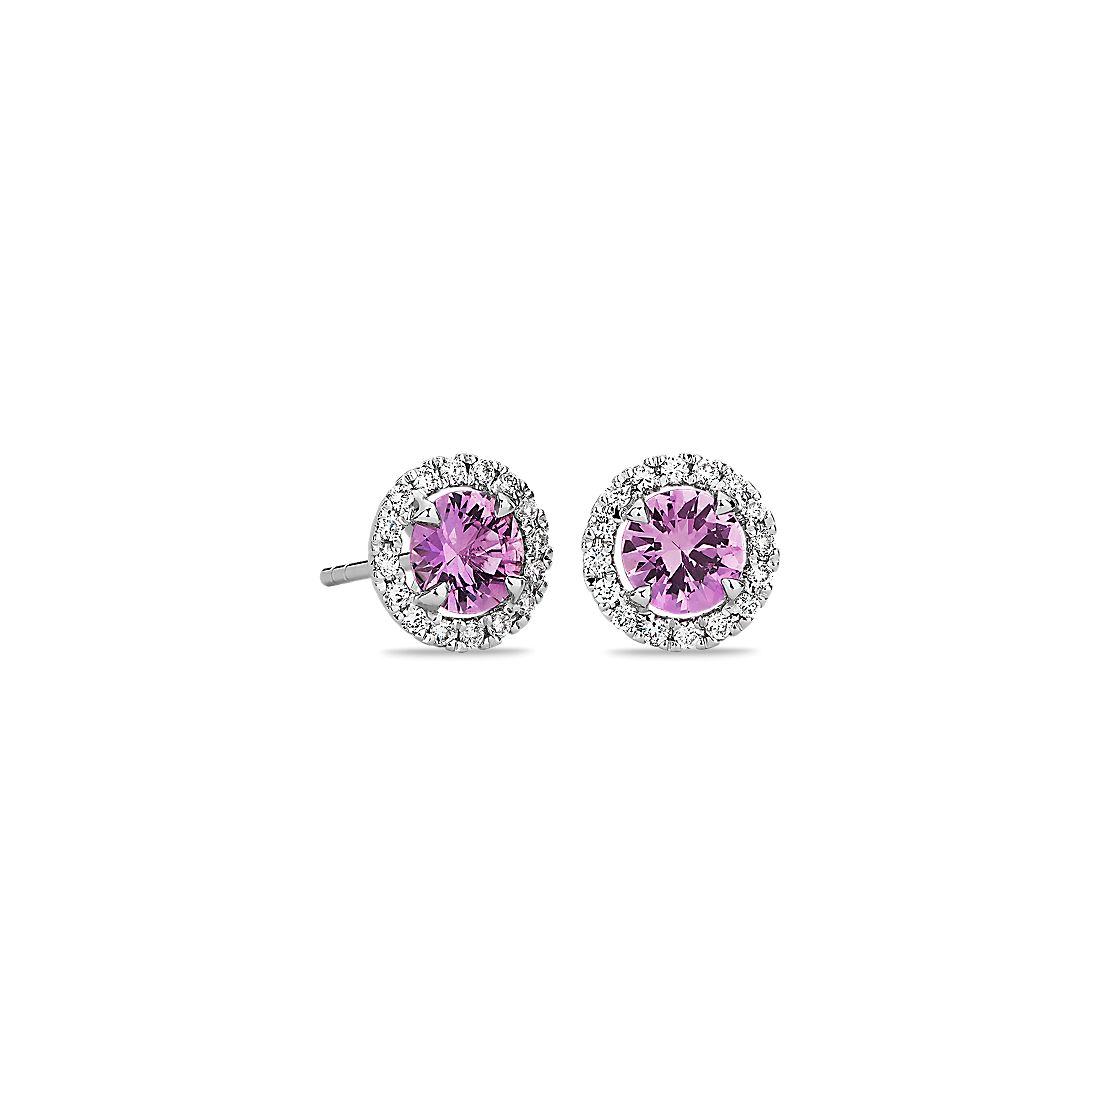 Pink Sapphire and Diamond Halo Earrings in 18k White Gold